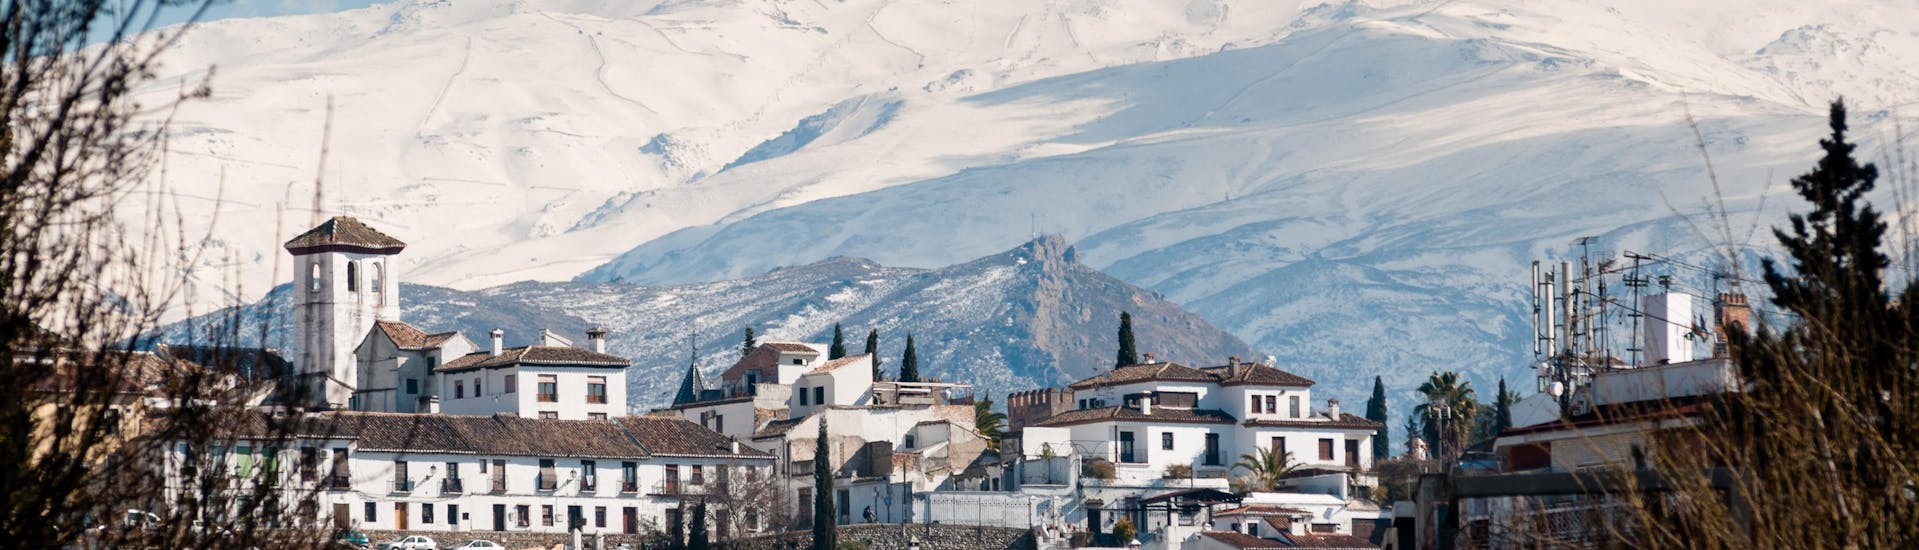 View of Sierra Nevada in granada during the winter where ski schools teach skiing lessons